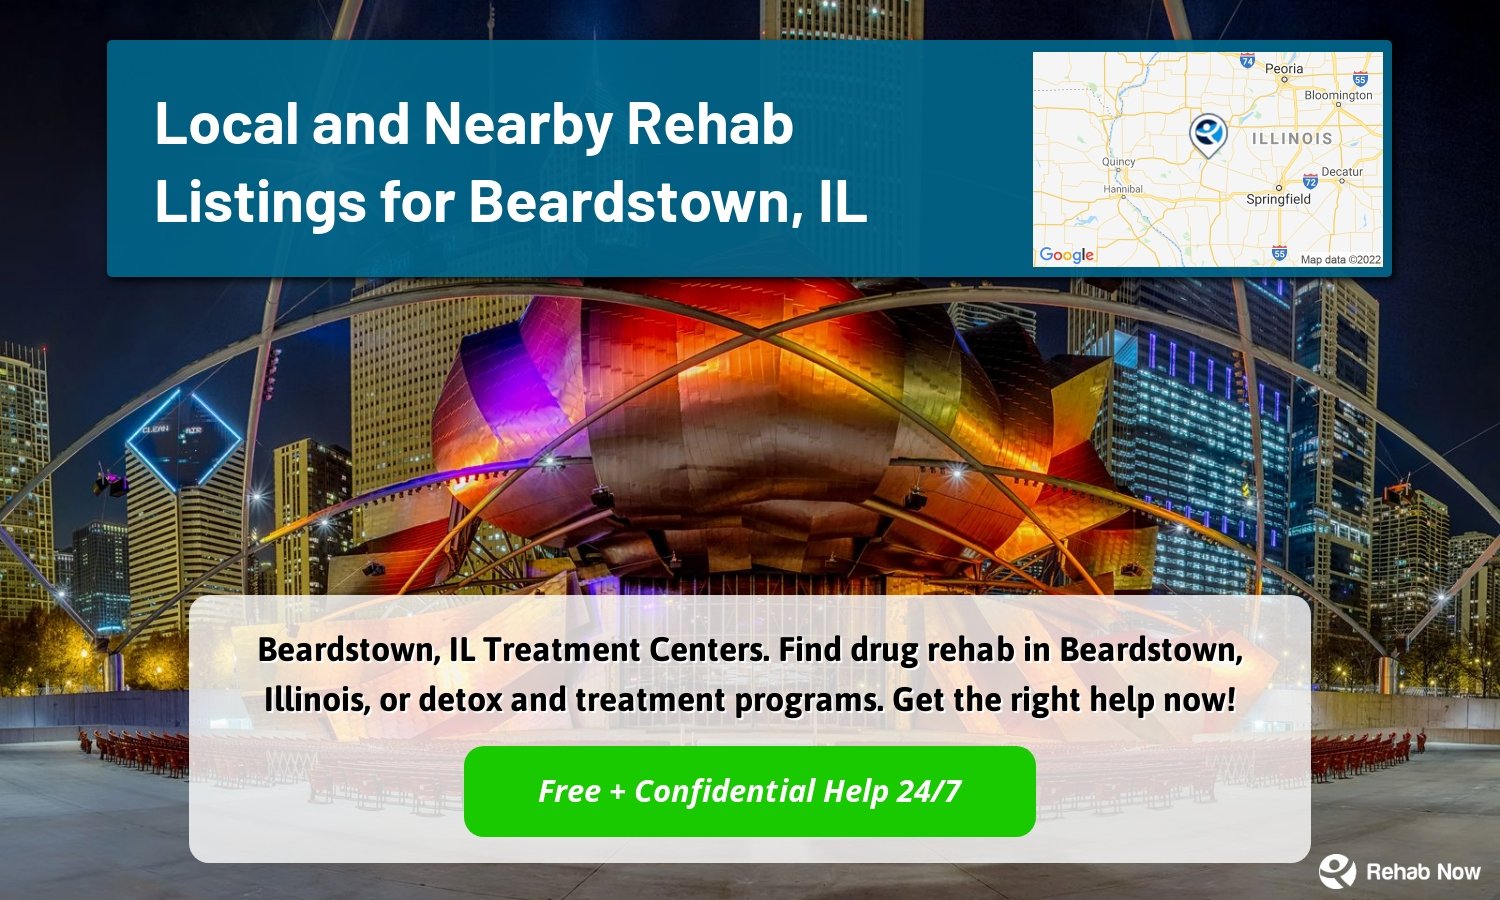 Beardstown, IL Treatment Centers. Find drug rehab in Beardstown, Illinois, or detox and treatment programs. Get the right help now!